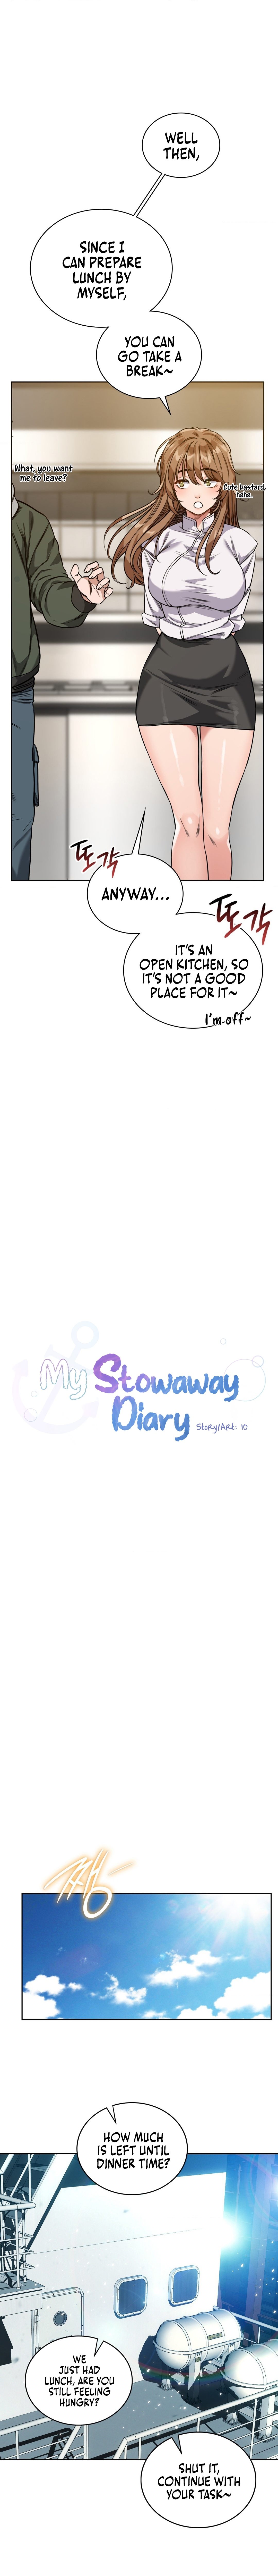 My Stowaway Diary Chapter 3 - Page 2